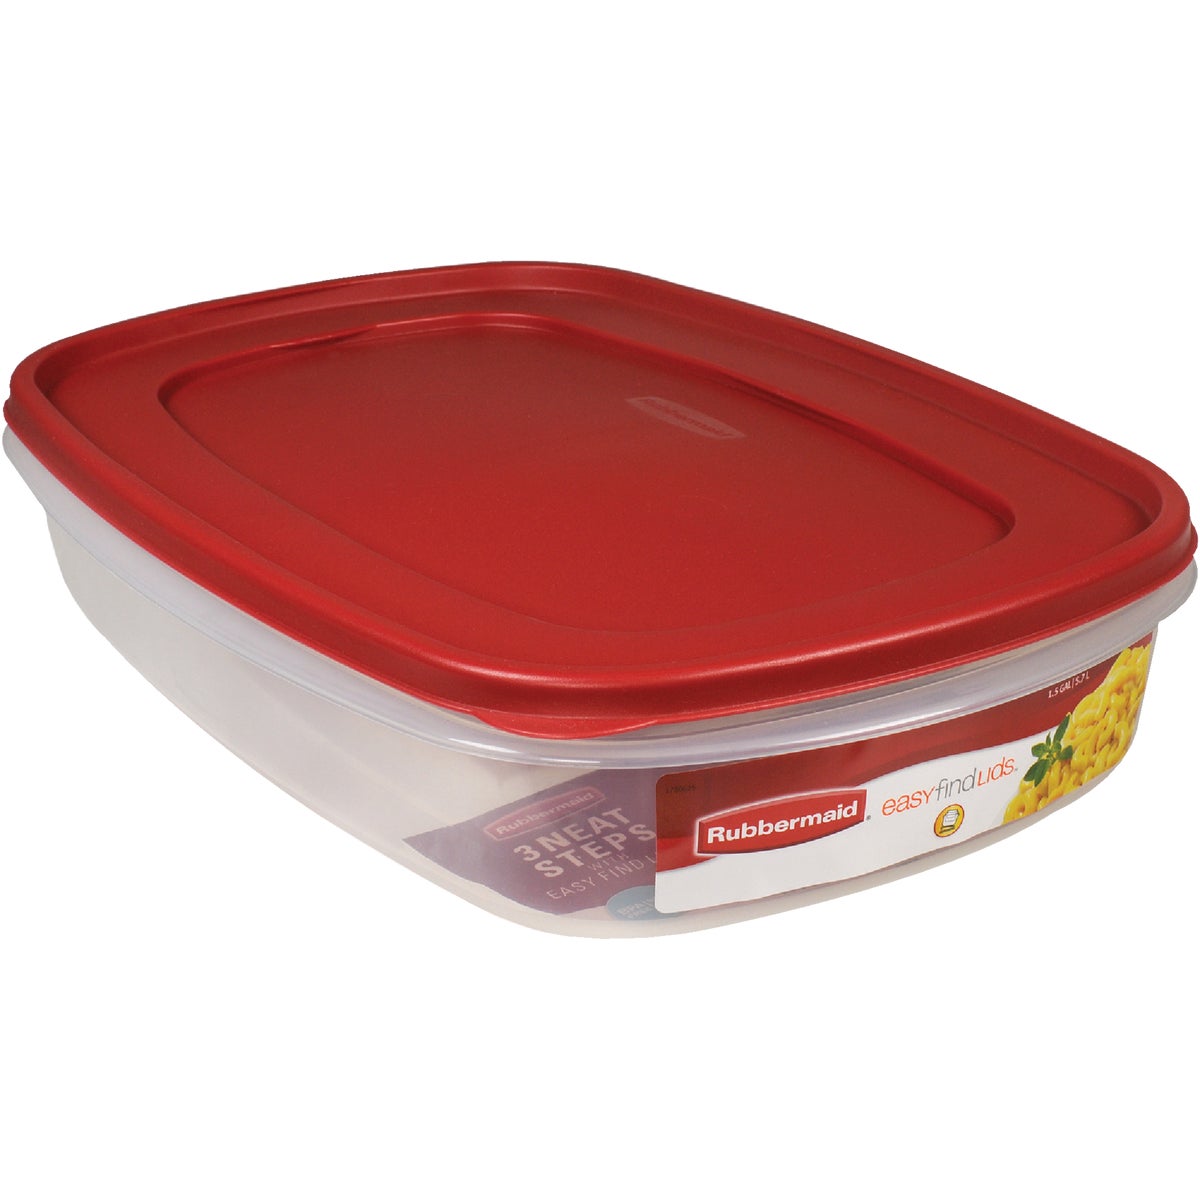 Rubbermaid 1777084 Food Storage Container, 1-1/4 Cup, Clear Base